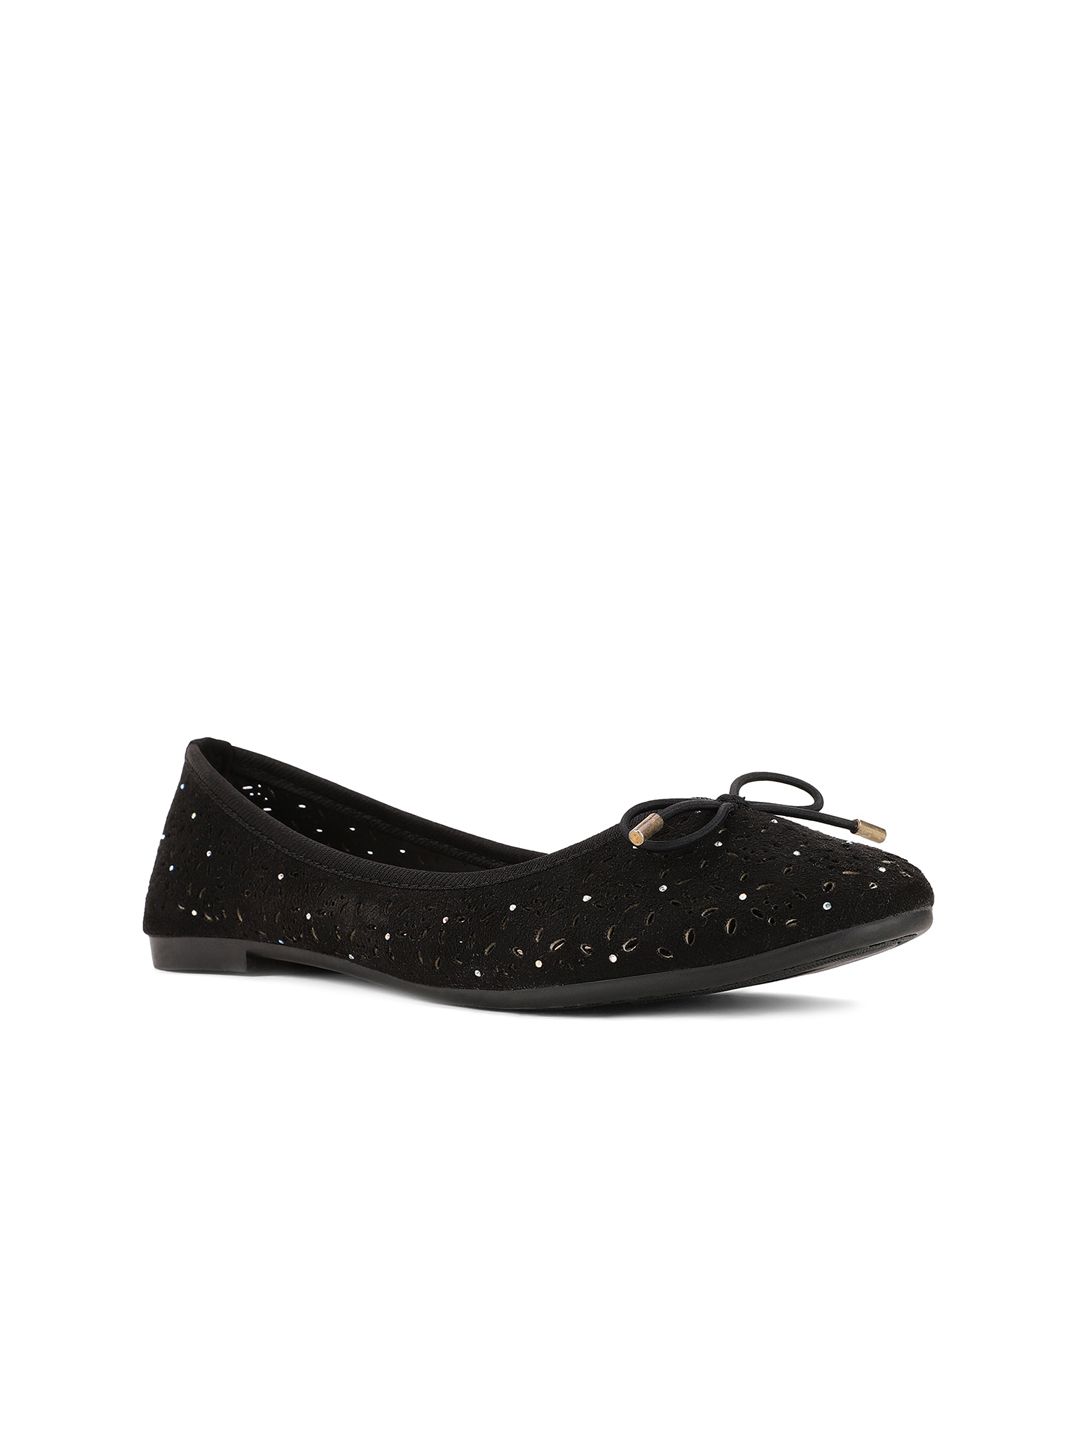 Bata Women Black Embellished Ballerinas with Laser Cuts Flats Price in India